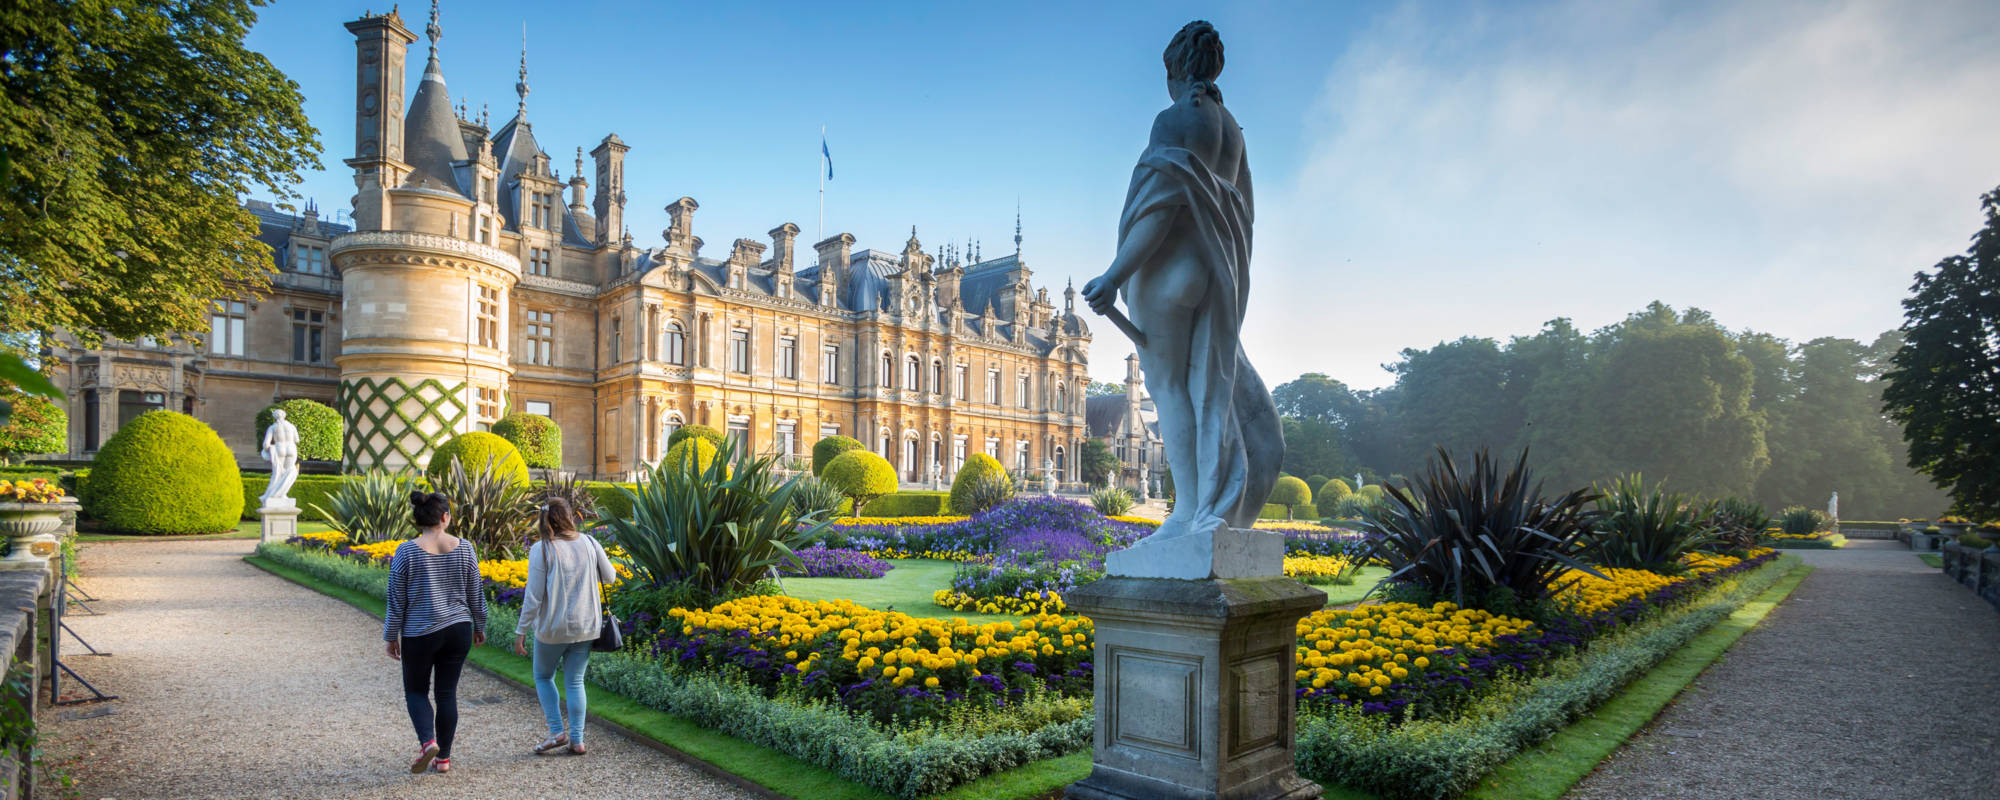 Nice Images Collection: Waddesdon Manor Desktop Wallpapers